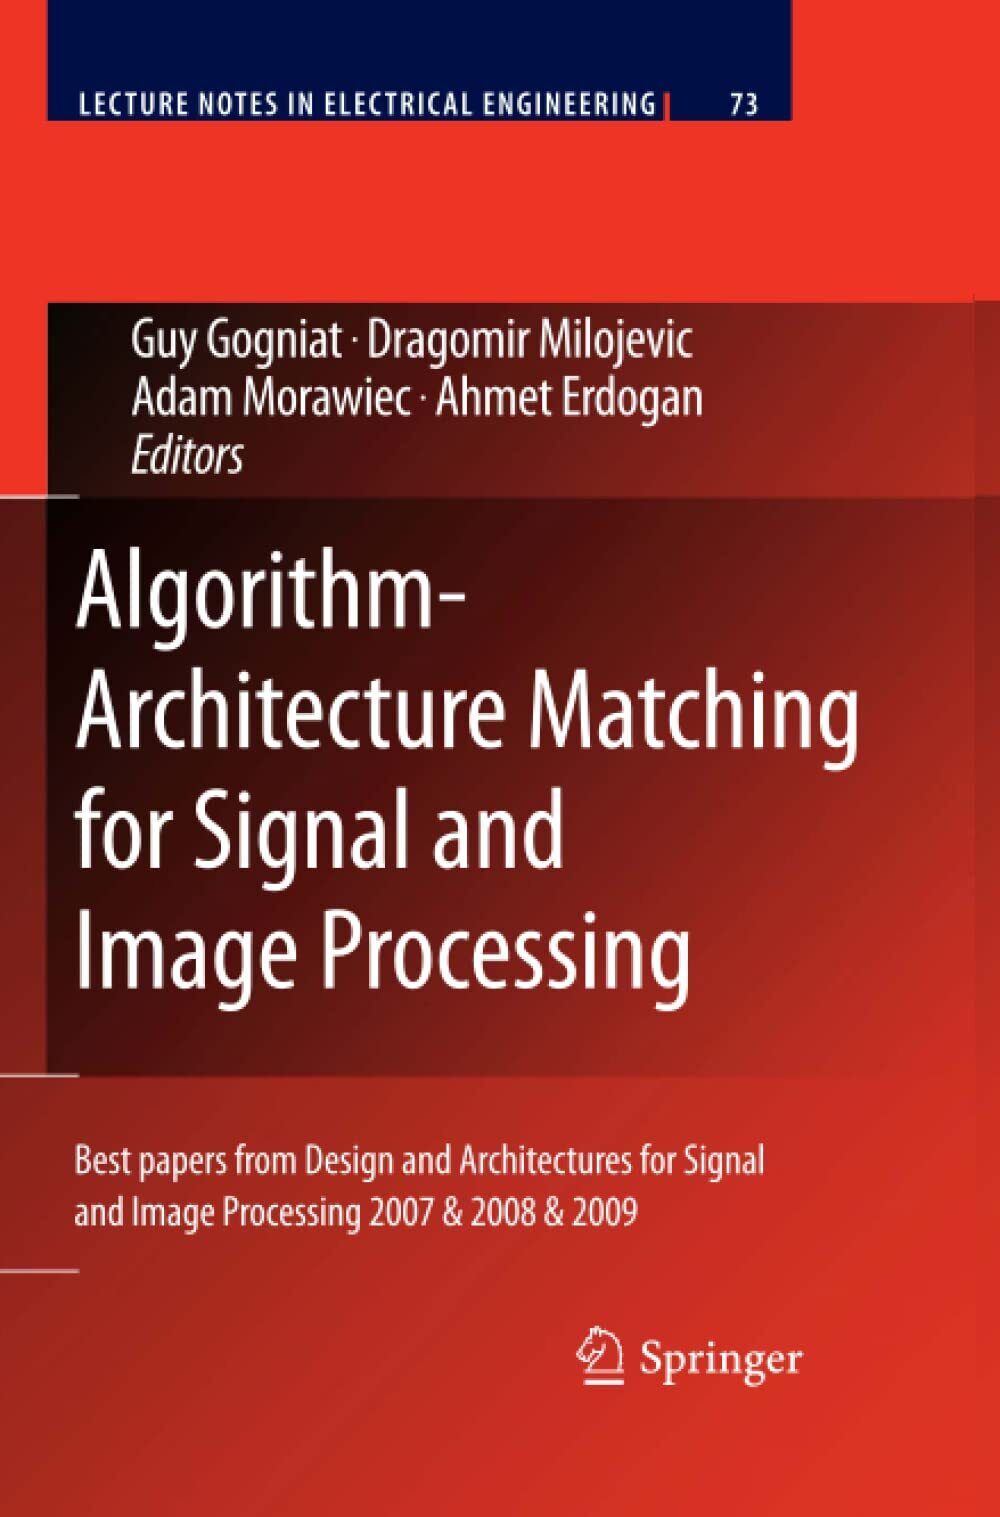 Algorithm-Architecture Matching for Signal and Image Processing - Springer, 2012